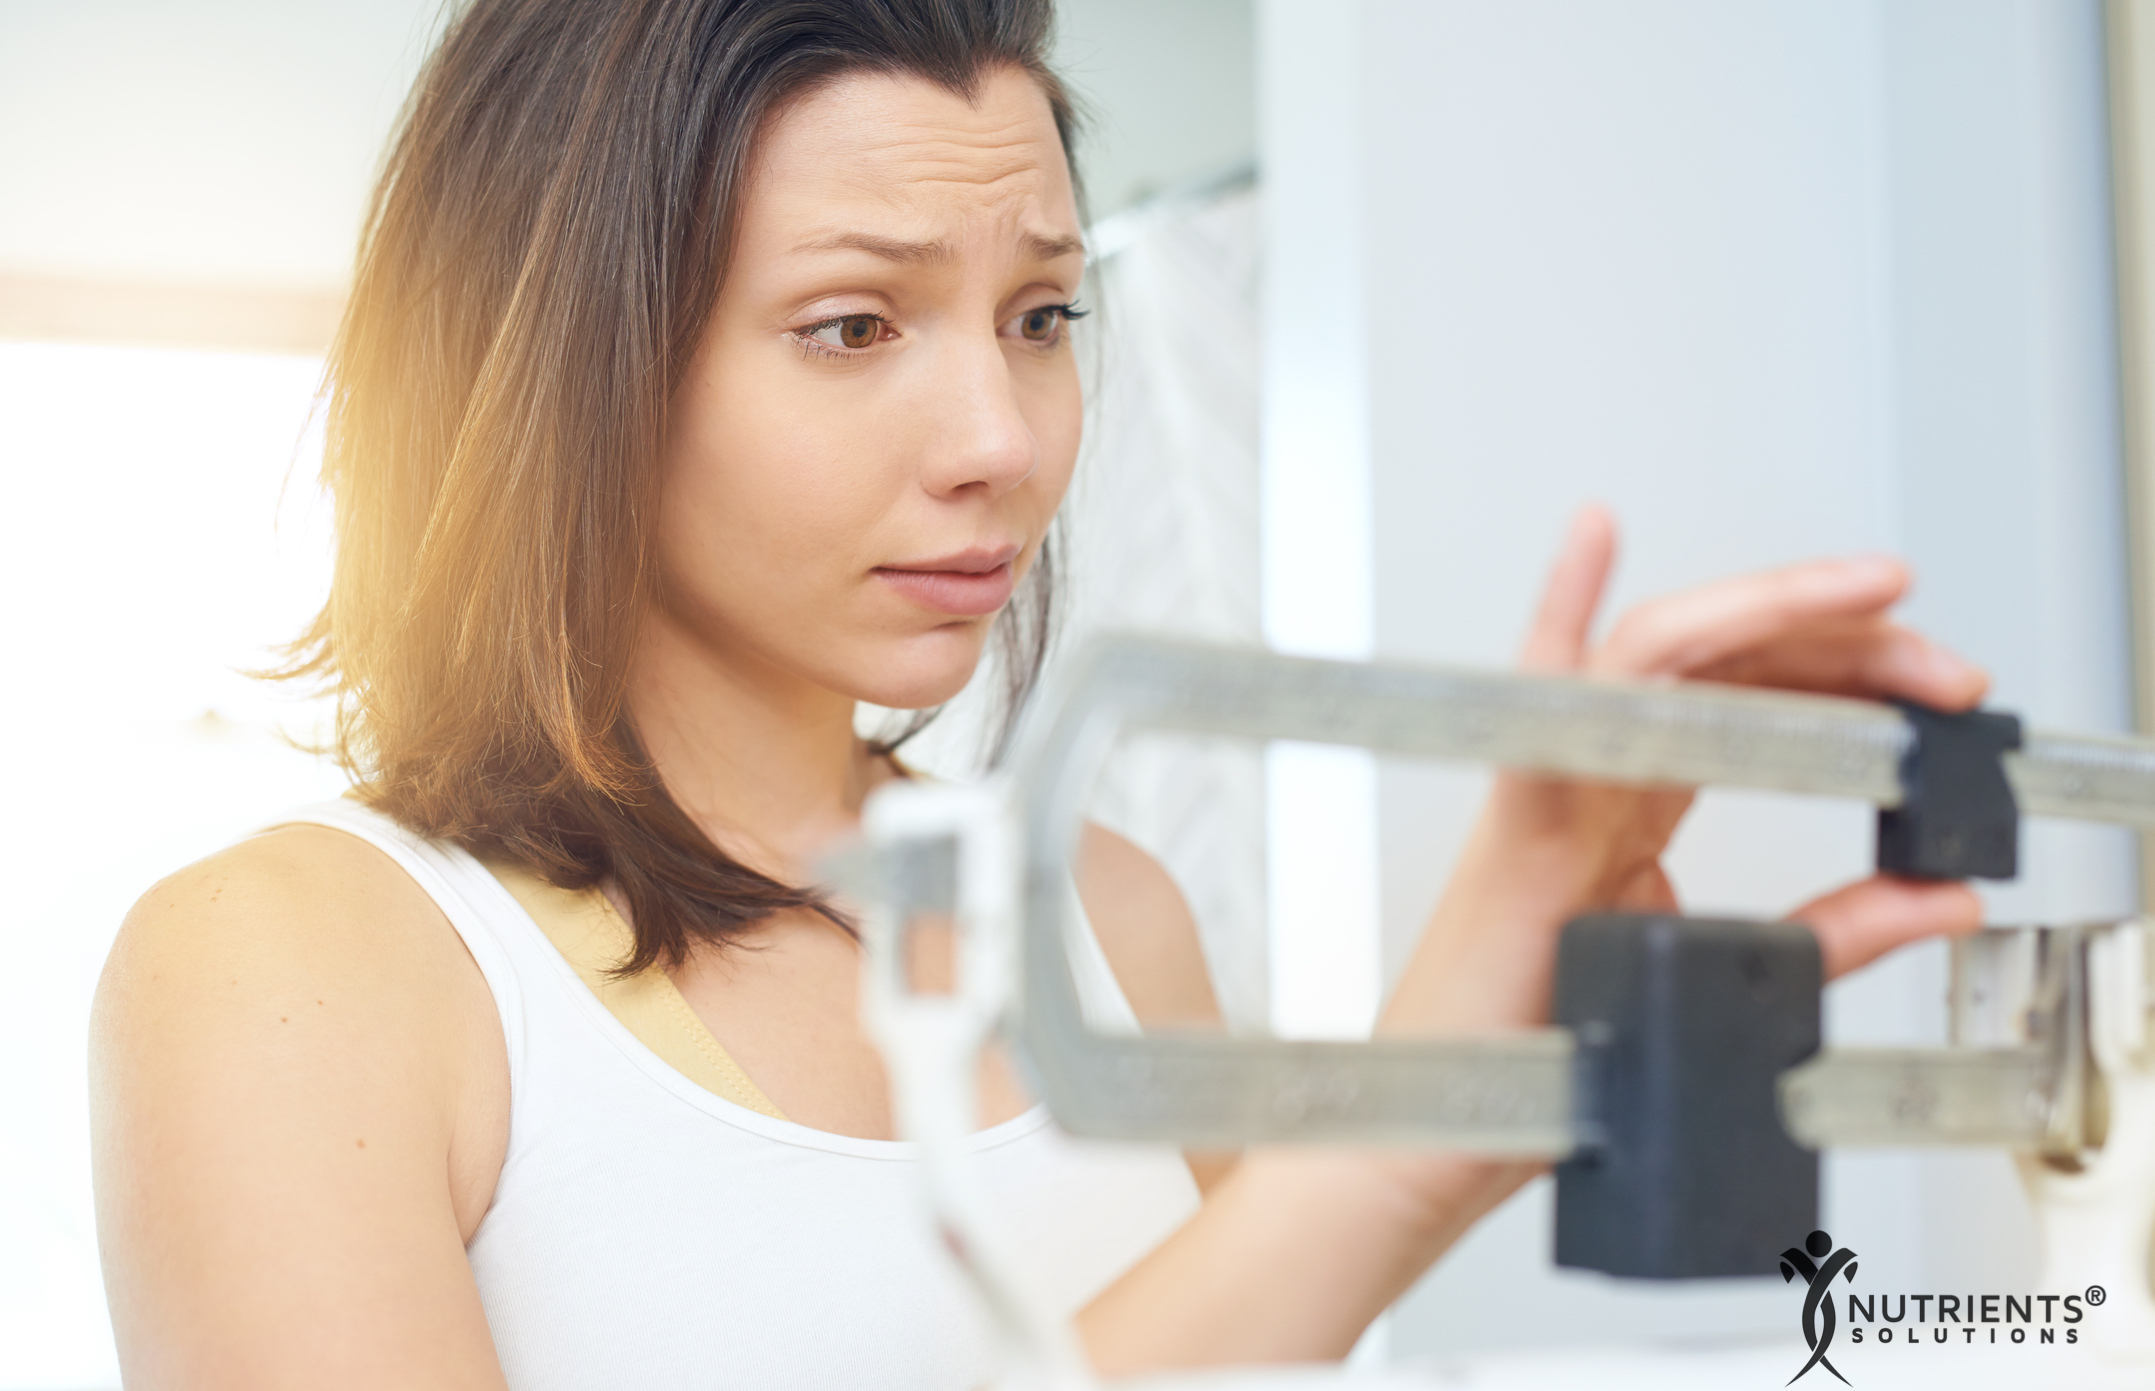 7 Bad Habits That Contribute to Weight Gain